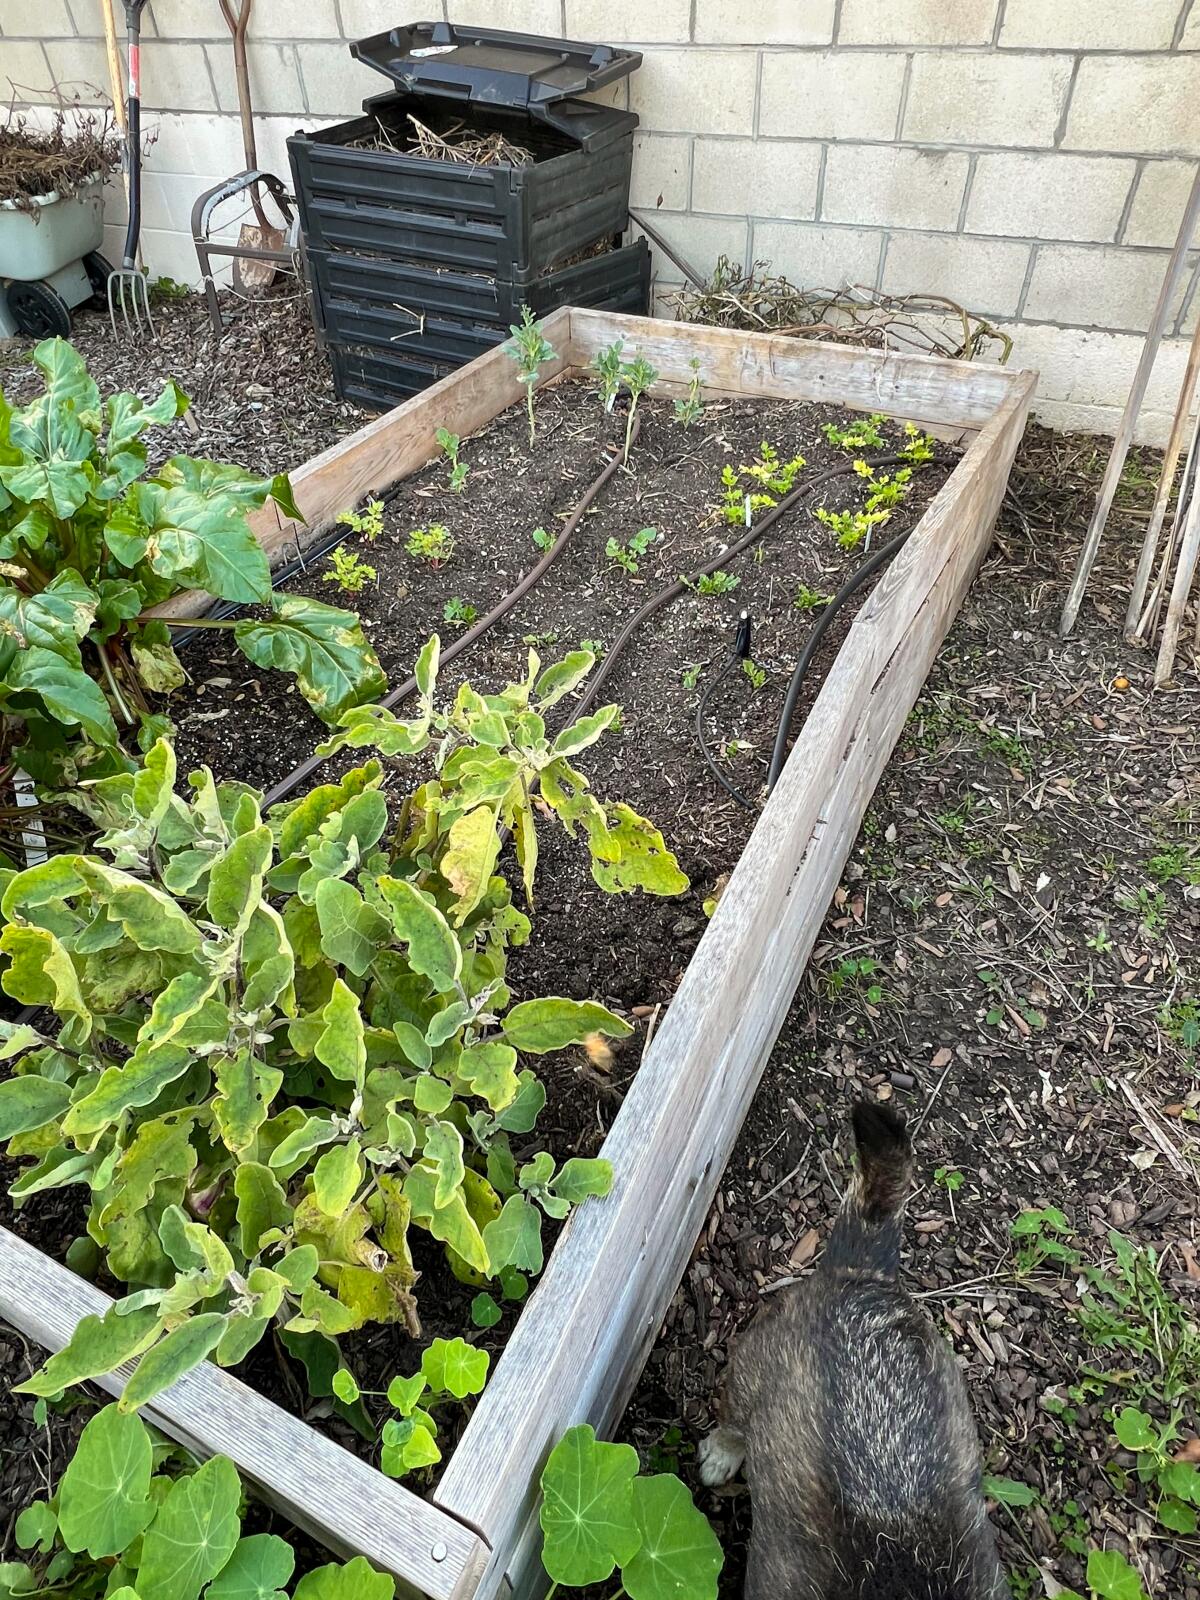 A raised bed only half full of compacted soil with a few vegetables that need to be removed to refill the box.